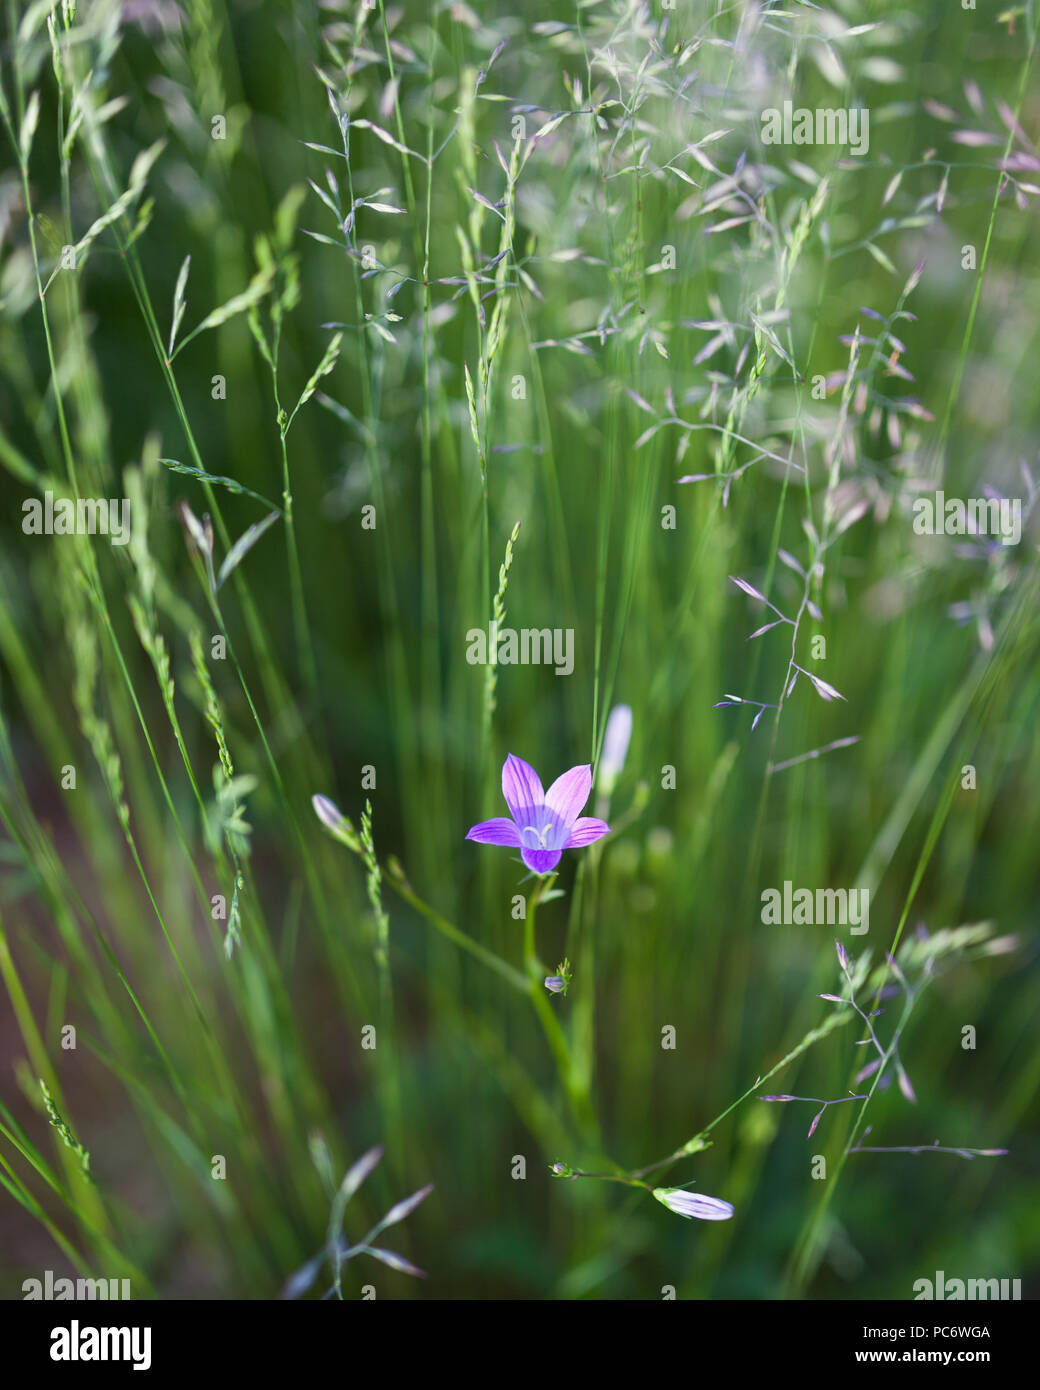 Harebell purple flower blooming close view Stock Photo